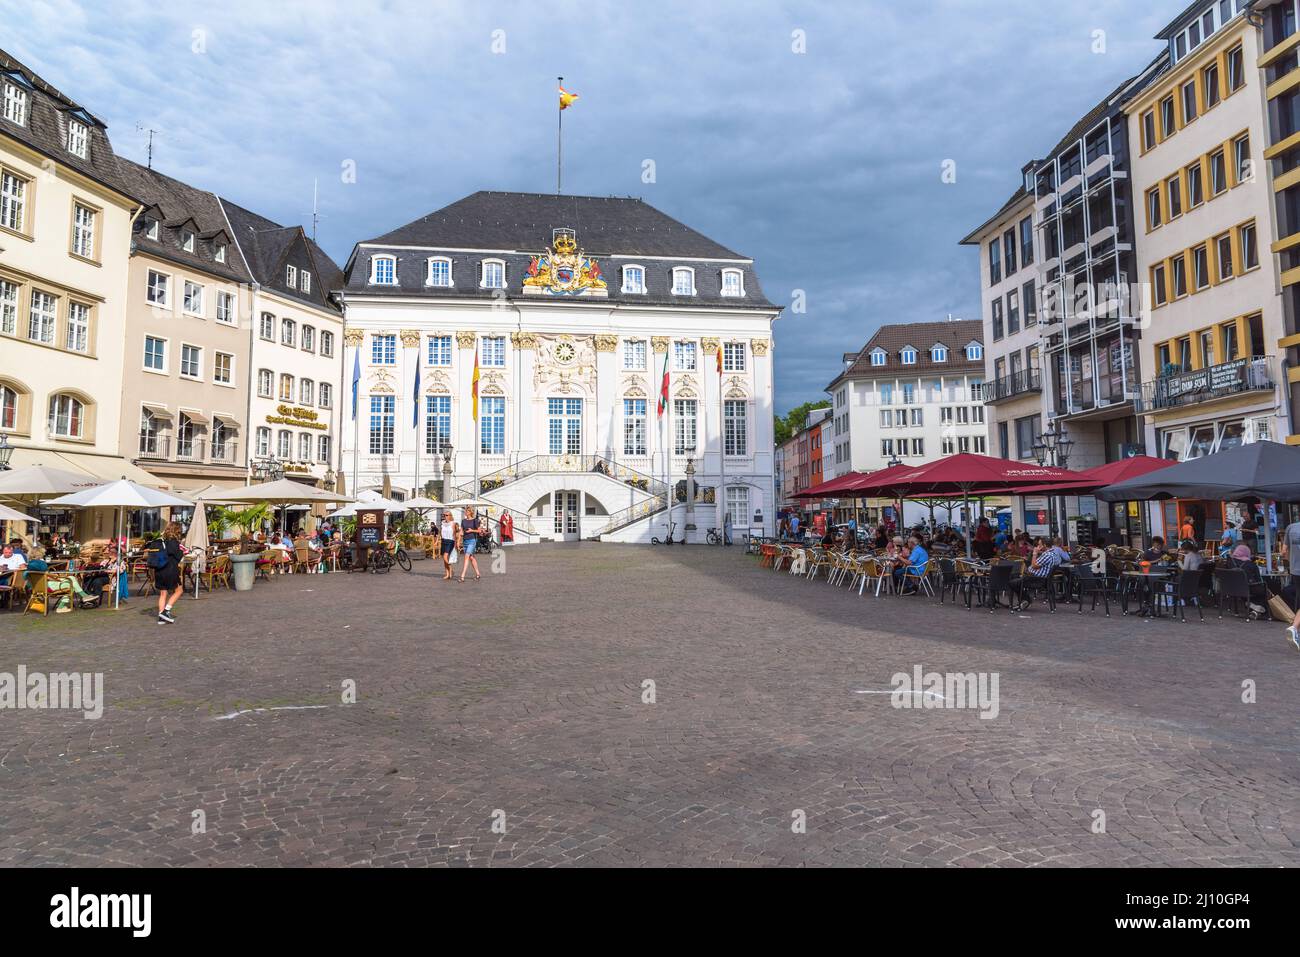 Bonn, Germany - July 12, 2021: View of Alte Rathaus in market square under storm clouds Stock Photo